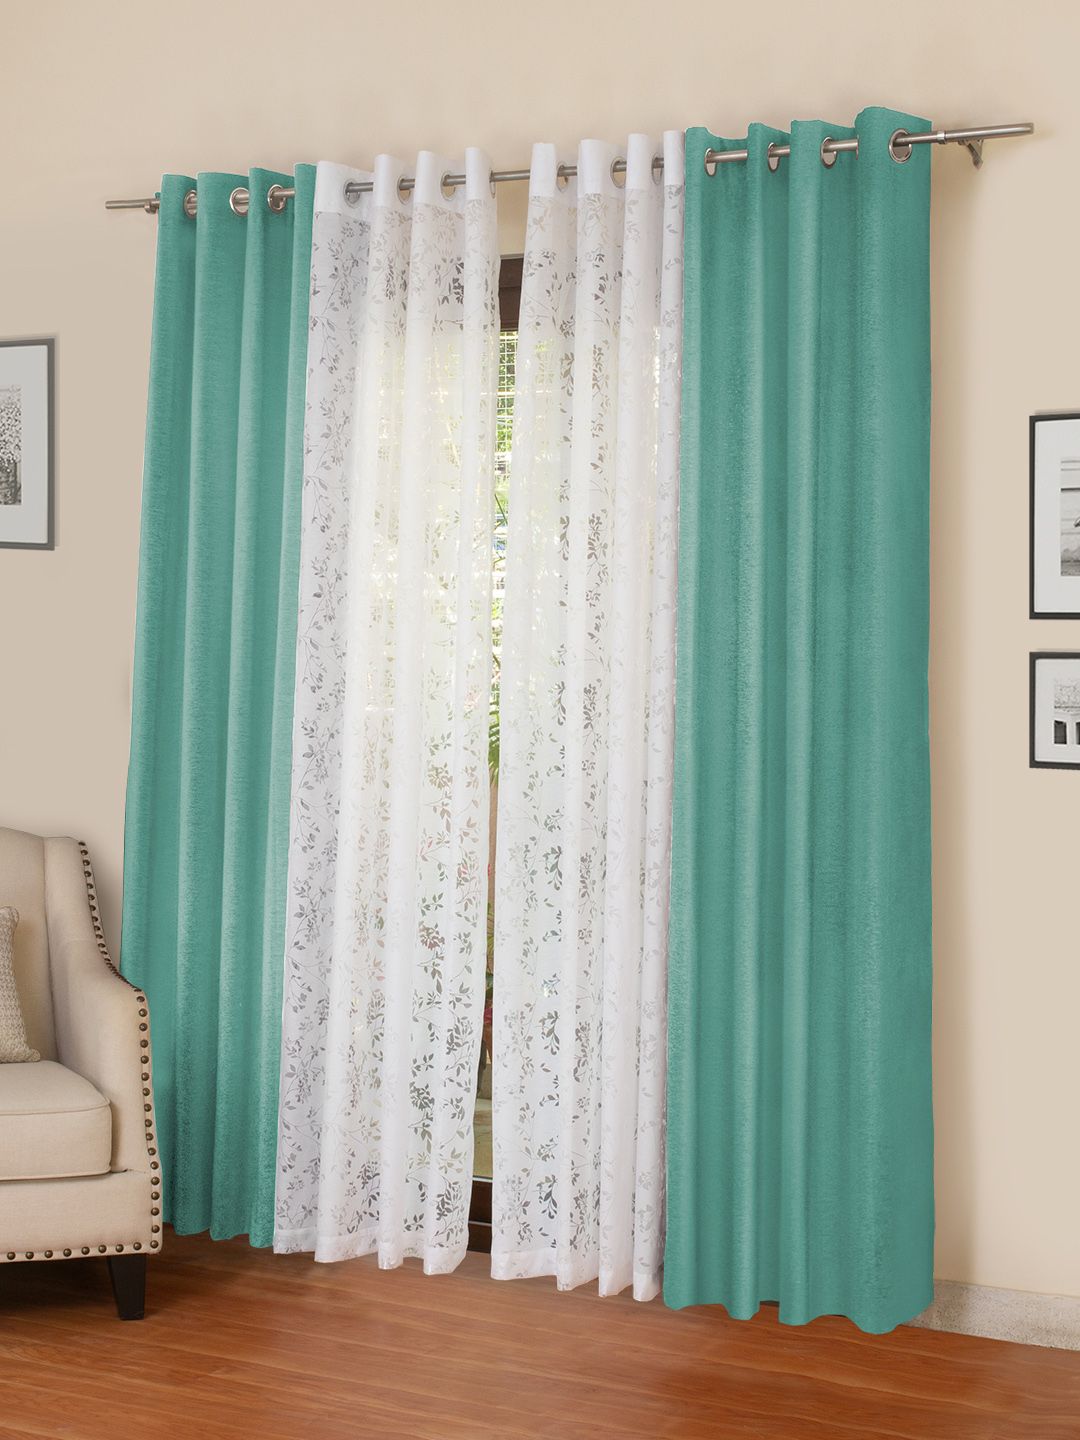 ROSARA HOME Turquoise Blue & White Set of 4 Door Curtains Price in India